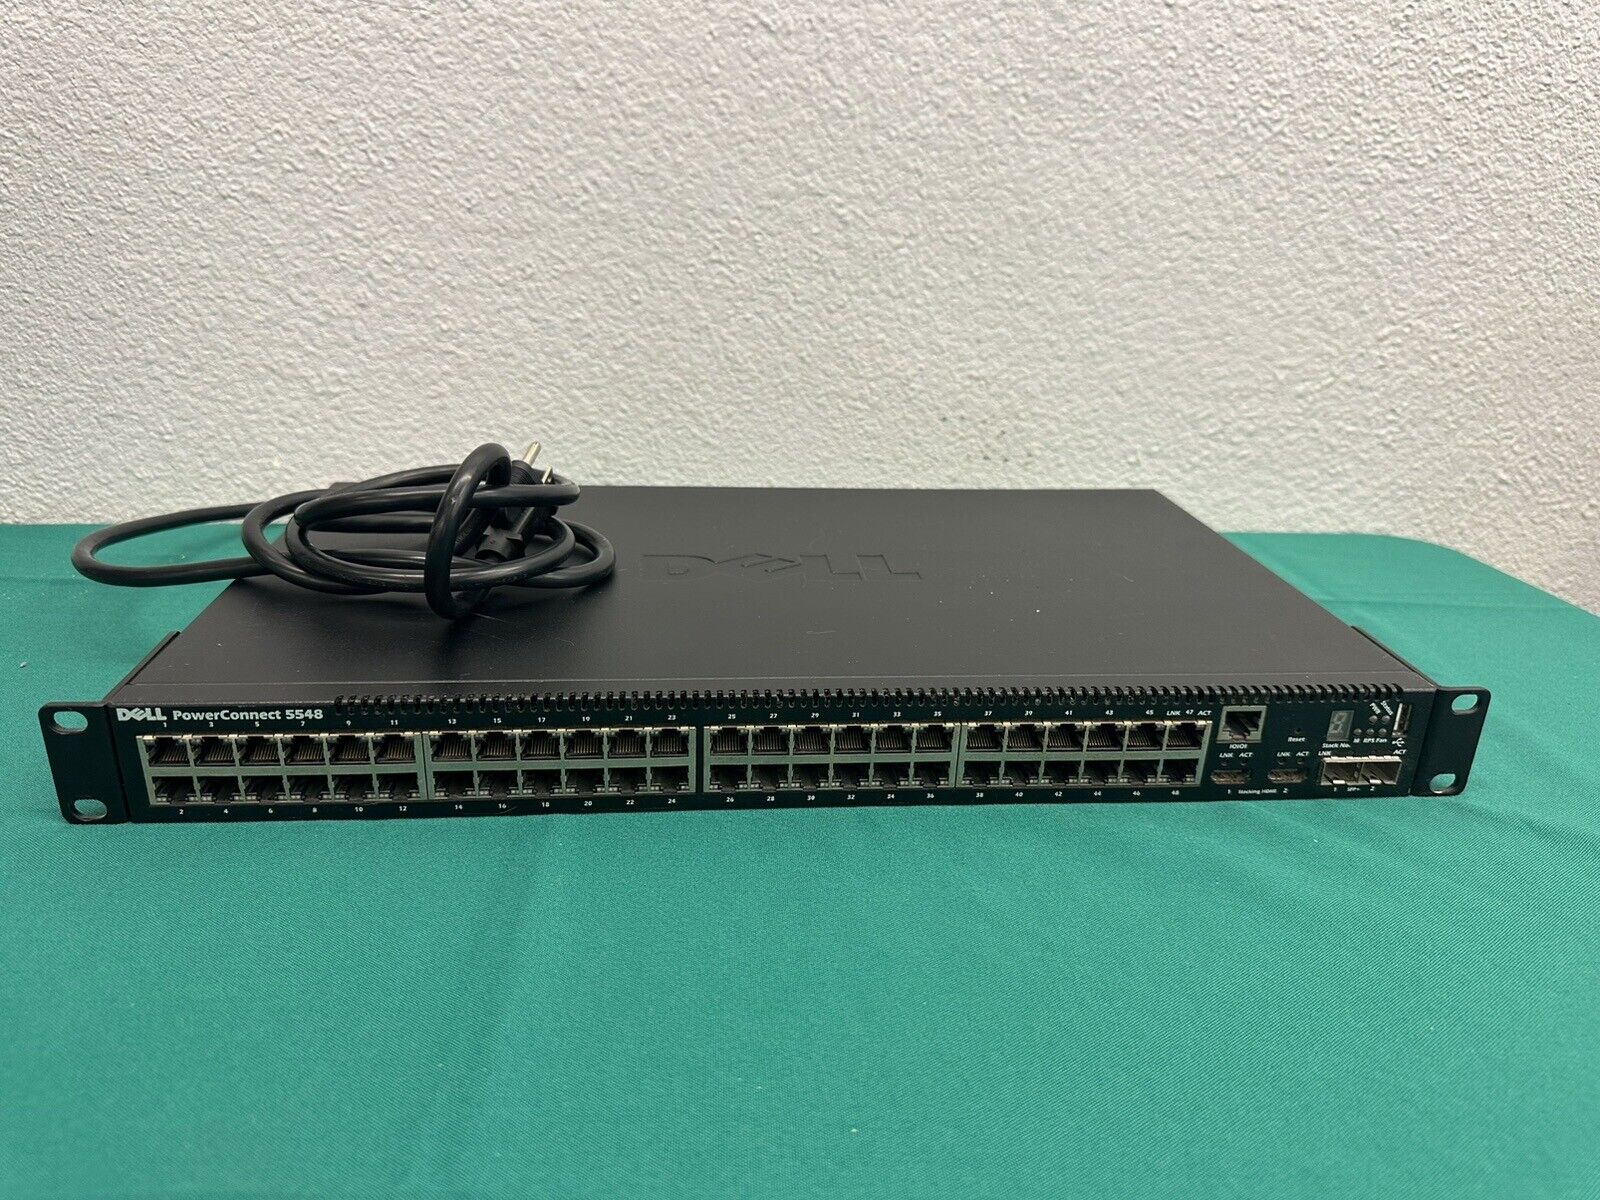 5548 Dell PowerConnect 48-Port Gigabit PoE Switch Pre Owned